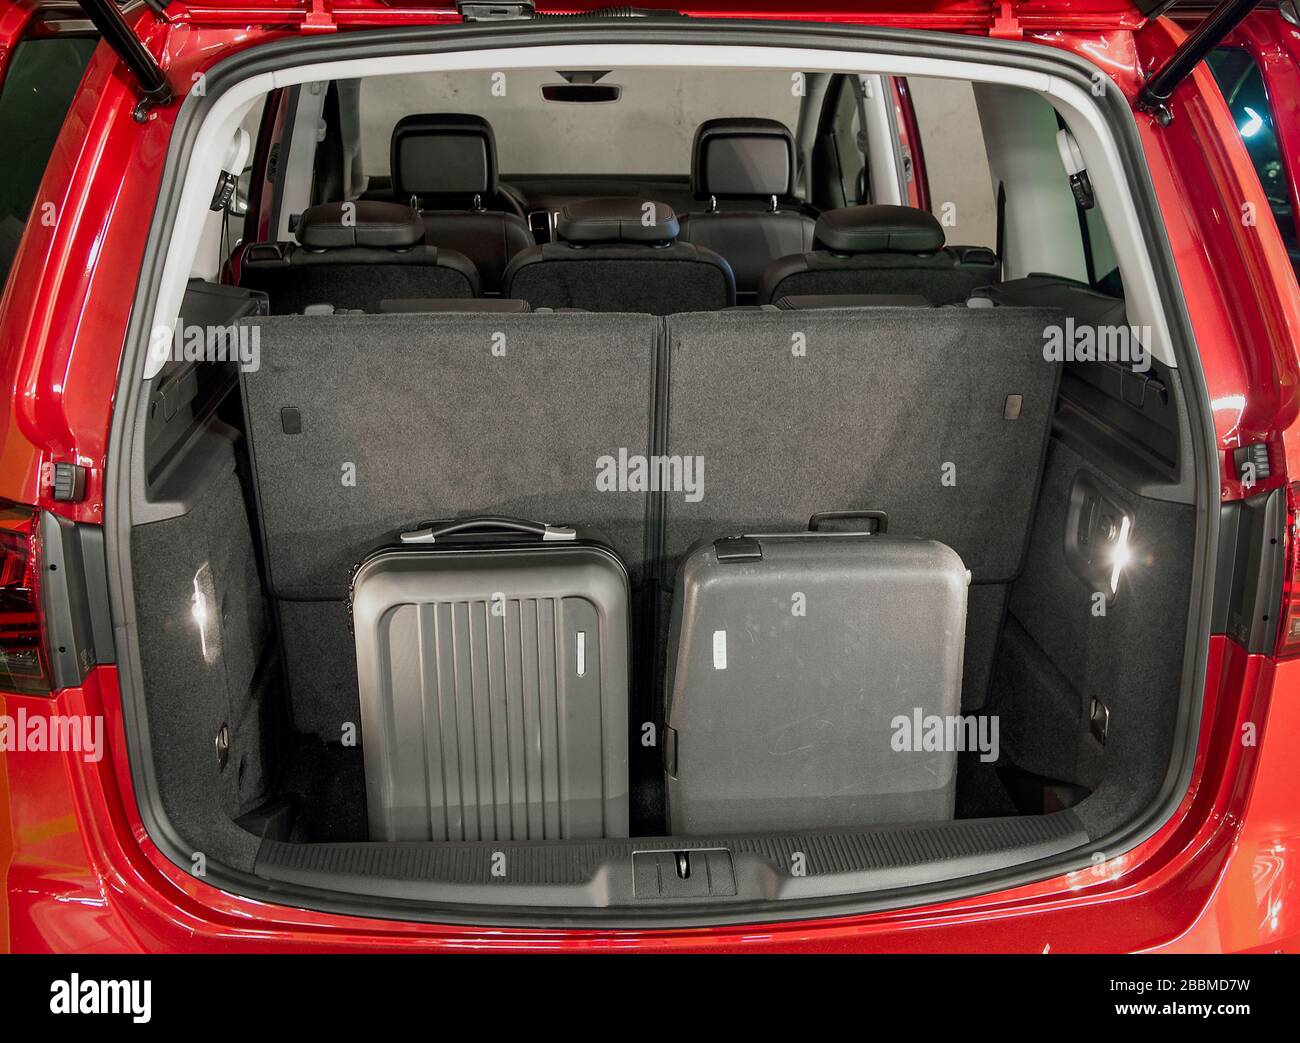 2015 SEAT Alhambra MPV people carrier Stock Photo - Alamy